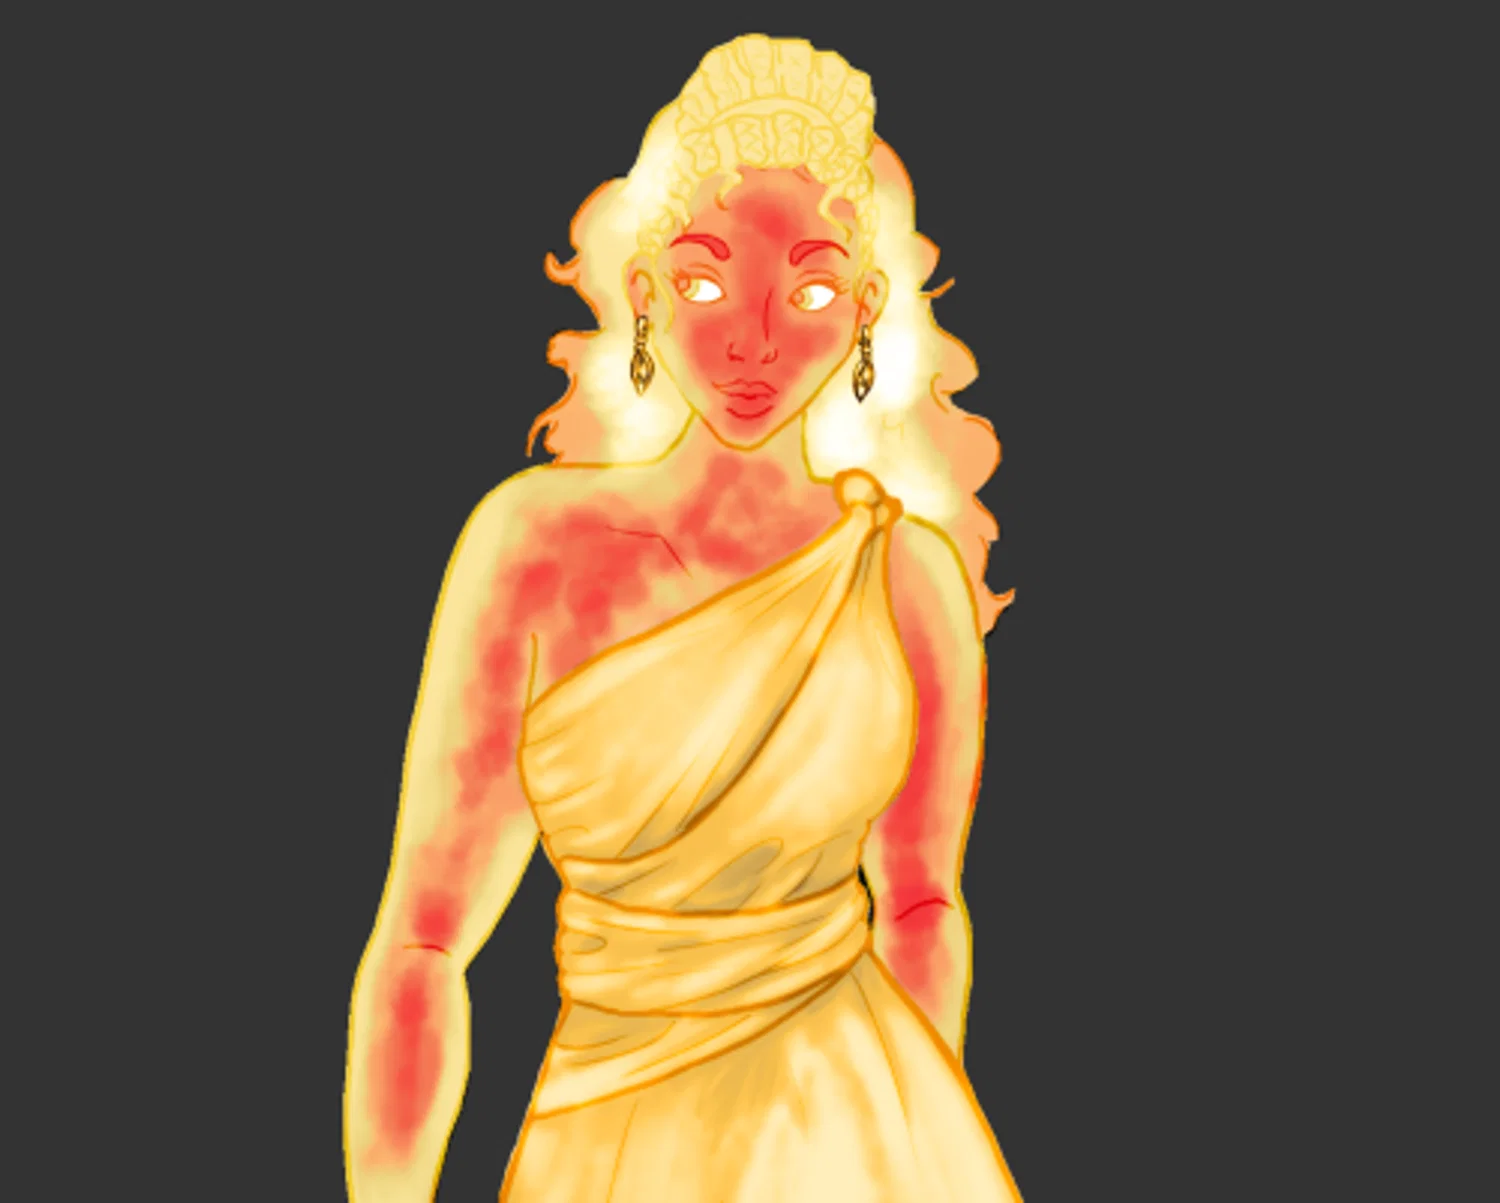 Sun goddess; glowing internally like the surface of the sun with a golden dress and flaming hair